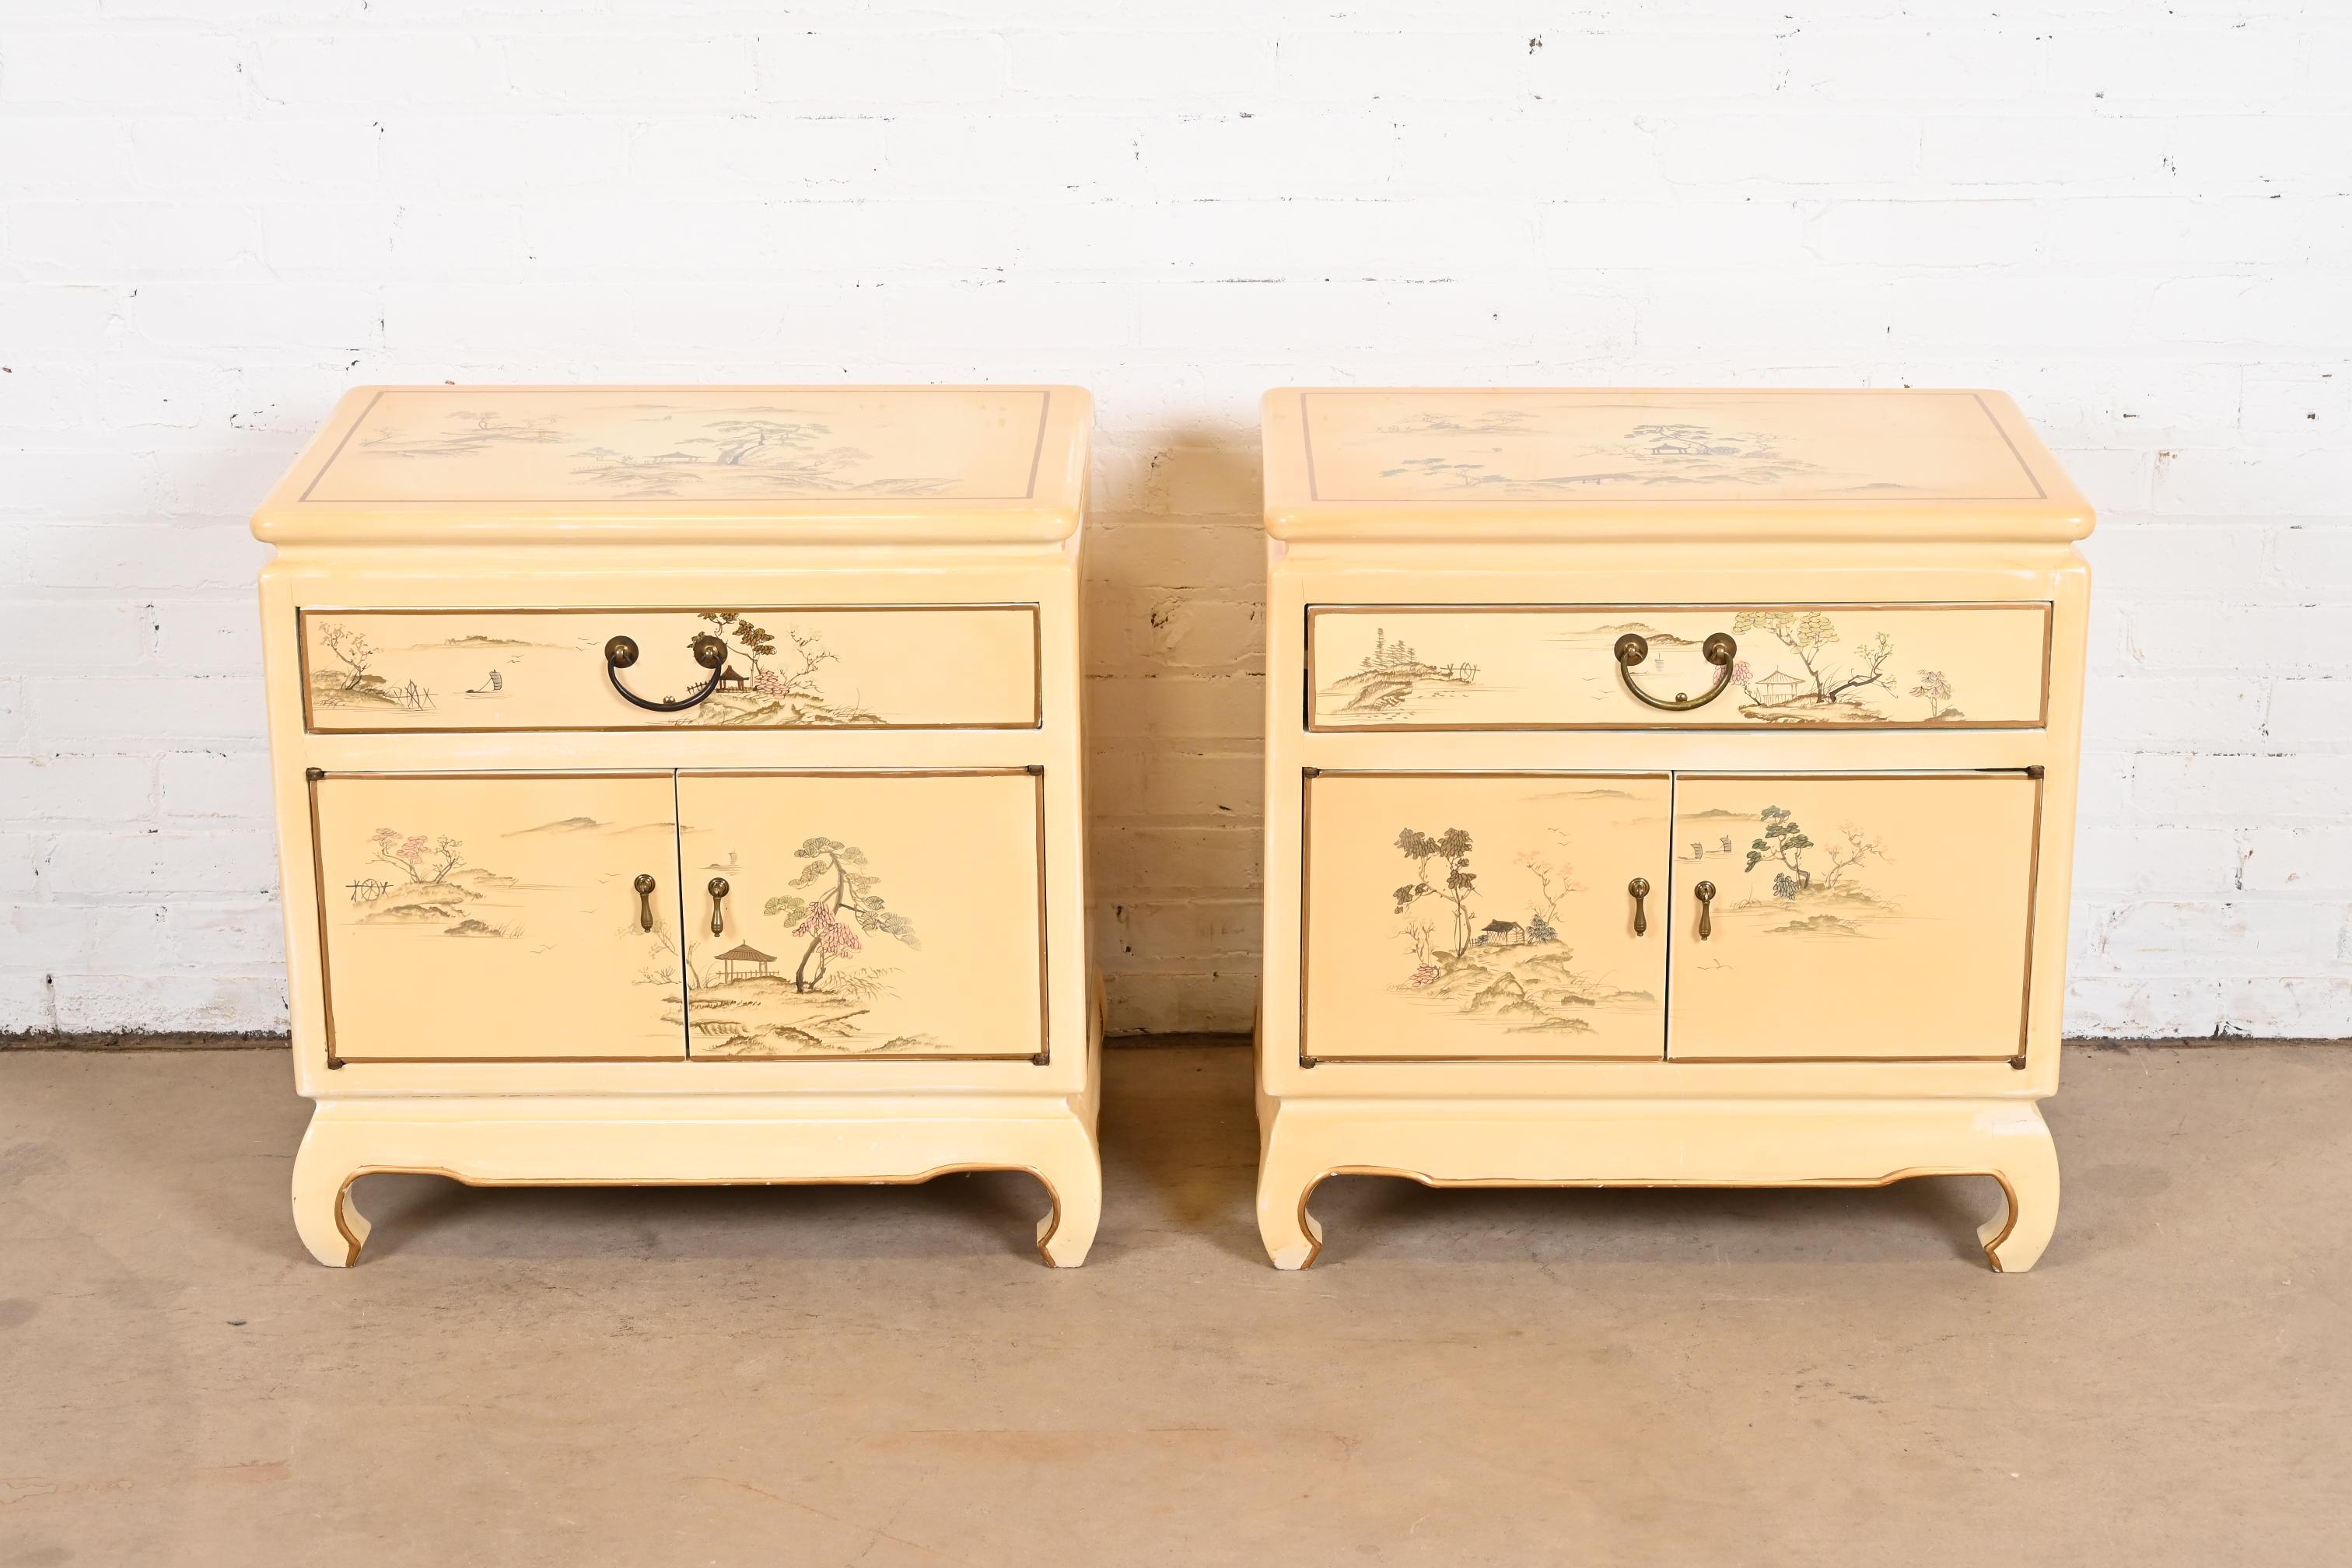 A gorgeous pair of midcentury Hollywood Regency chinoiserie nightstands

In the manner of Henredon

USA, circa 1970s

Cream lacquered mahogany, with gold gilt trim, hand painted Asian nature scenes, and original brass hardware.

Measures: